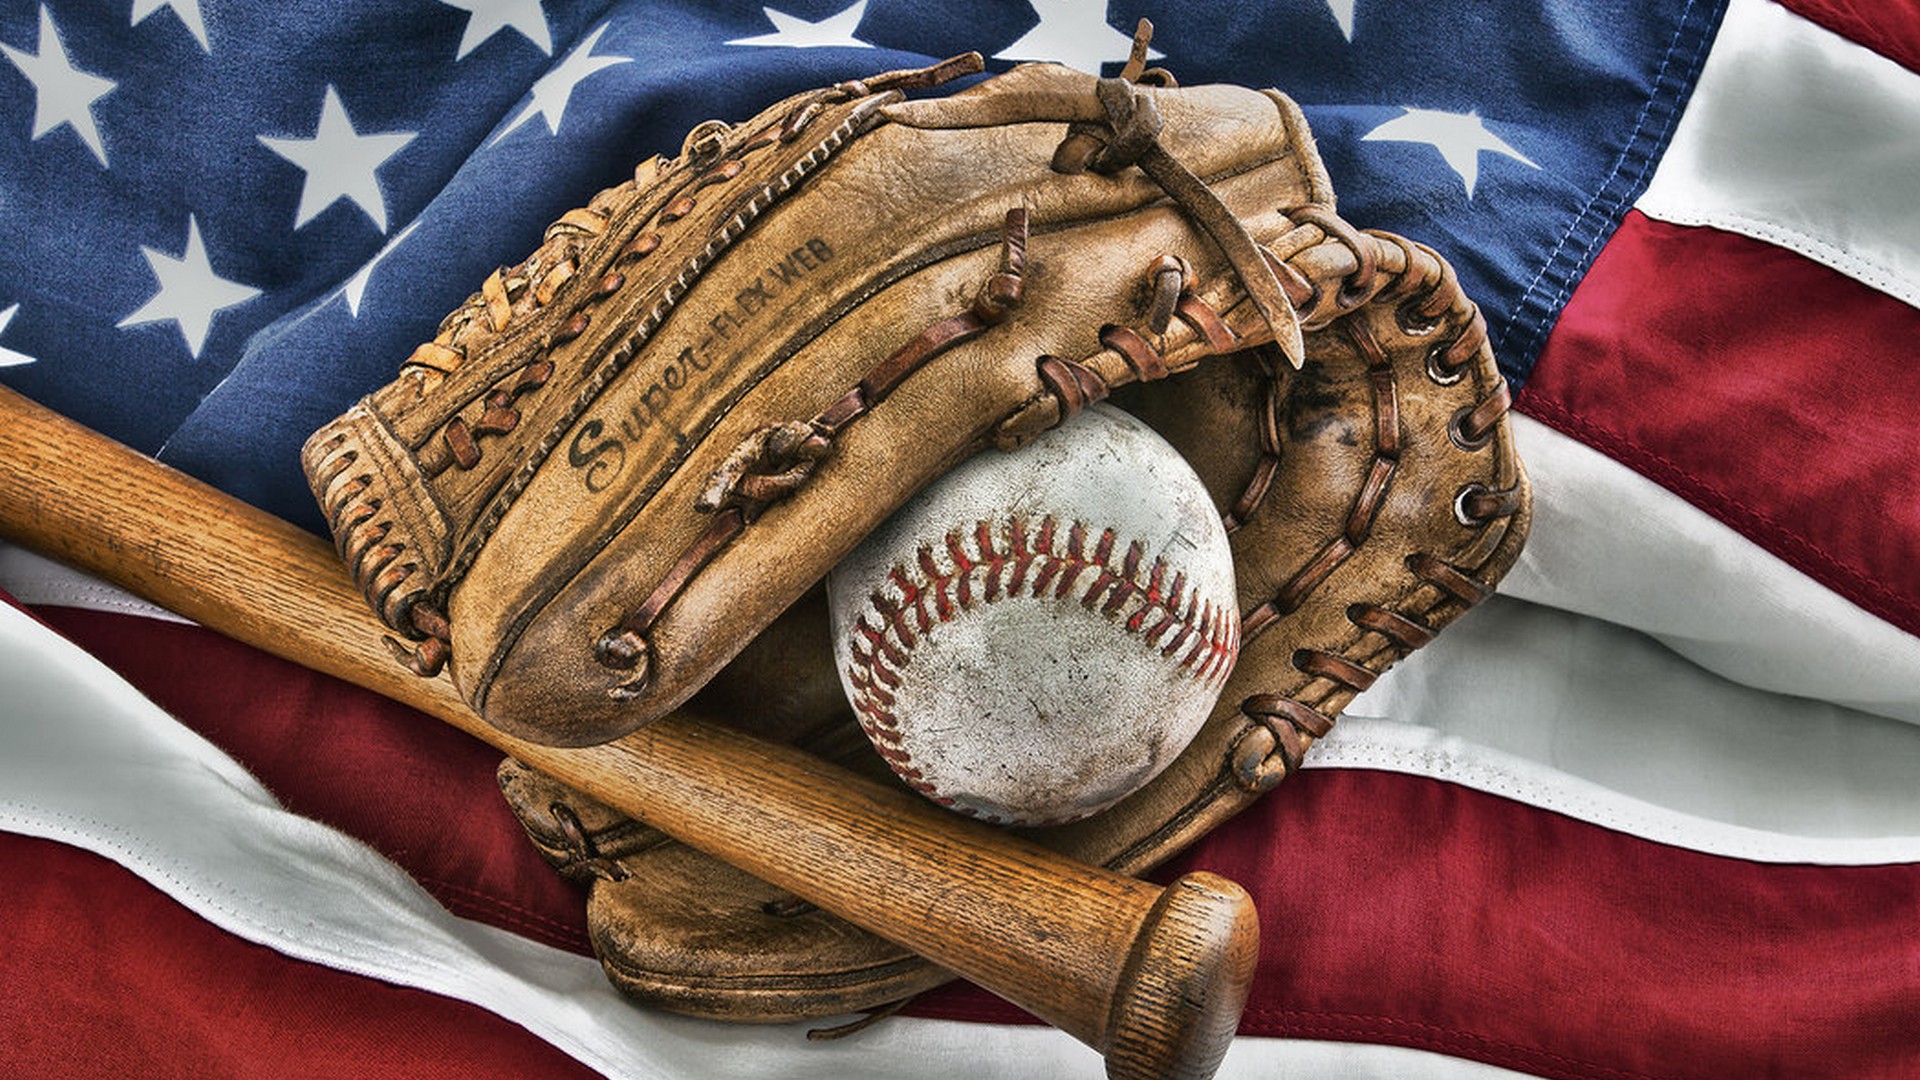 Baseball HD Wallpapers with high-resolution 1920x1080 pixel. You can use this wallpaper for Mac Desktop Wallpaper, Laptop Screensavers, Android Wallpapers, Tablet or iPhone Home Screen and another mobile phone device